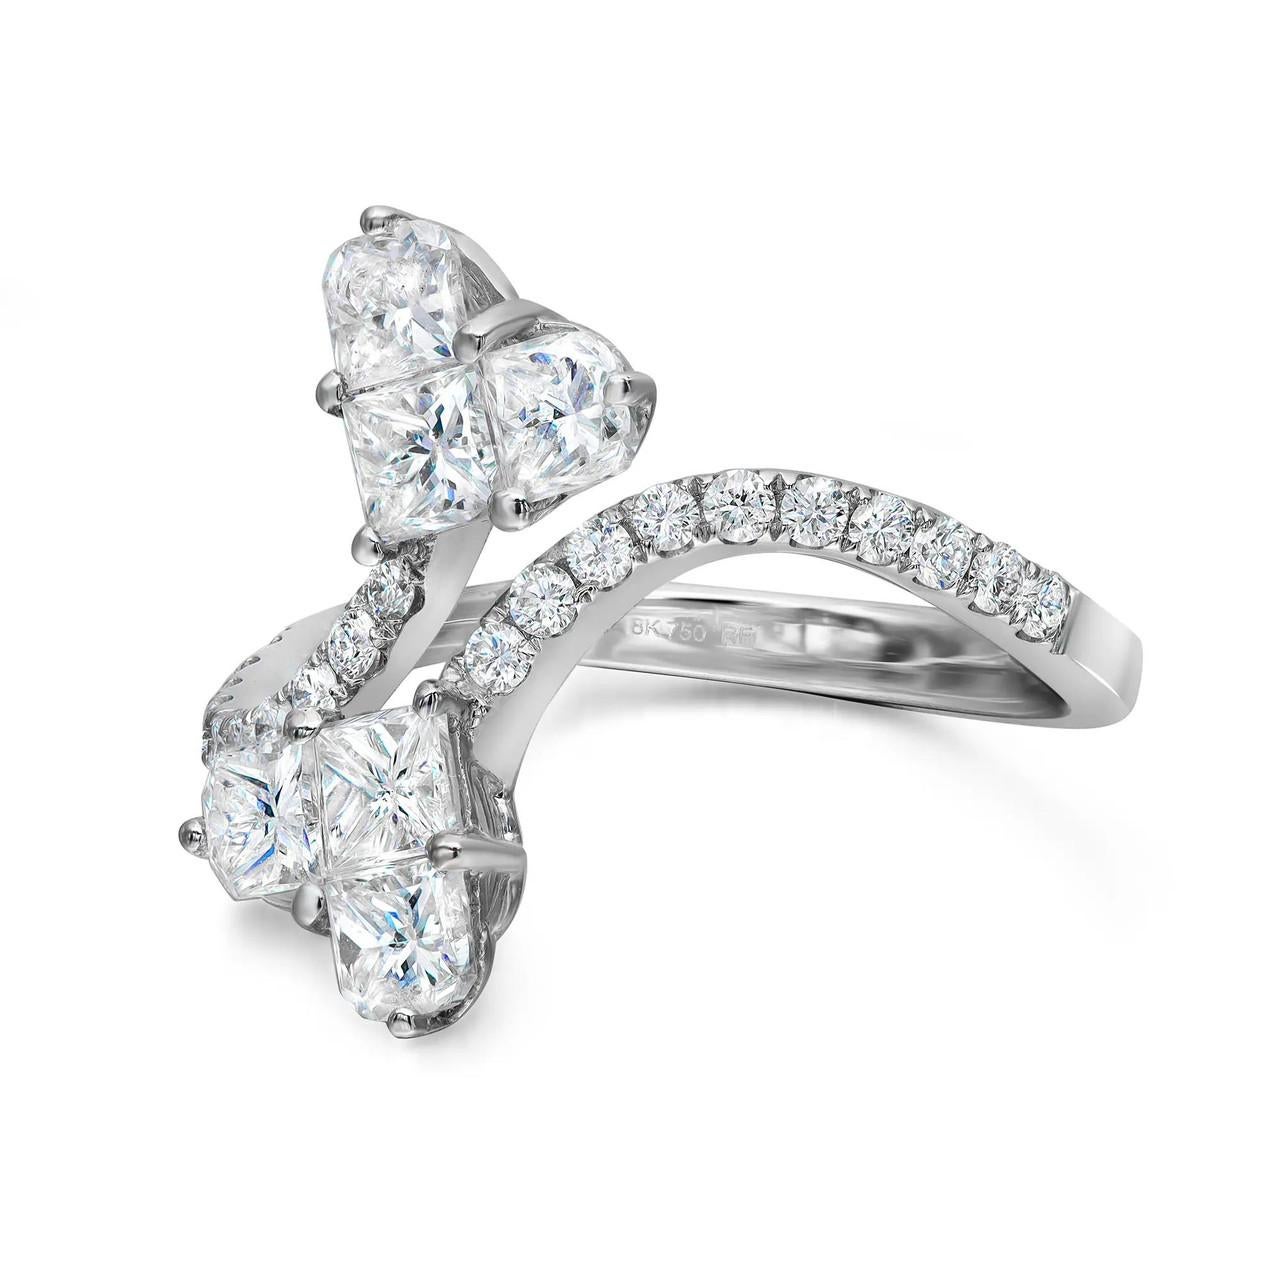 For Sale:  1.67 Carat Heart-Shaped Diamond Ring in 18k White Gold 2